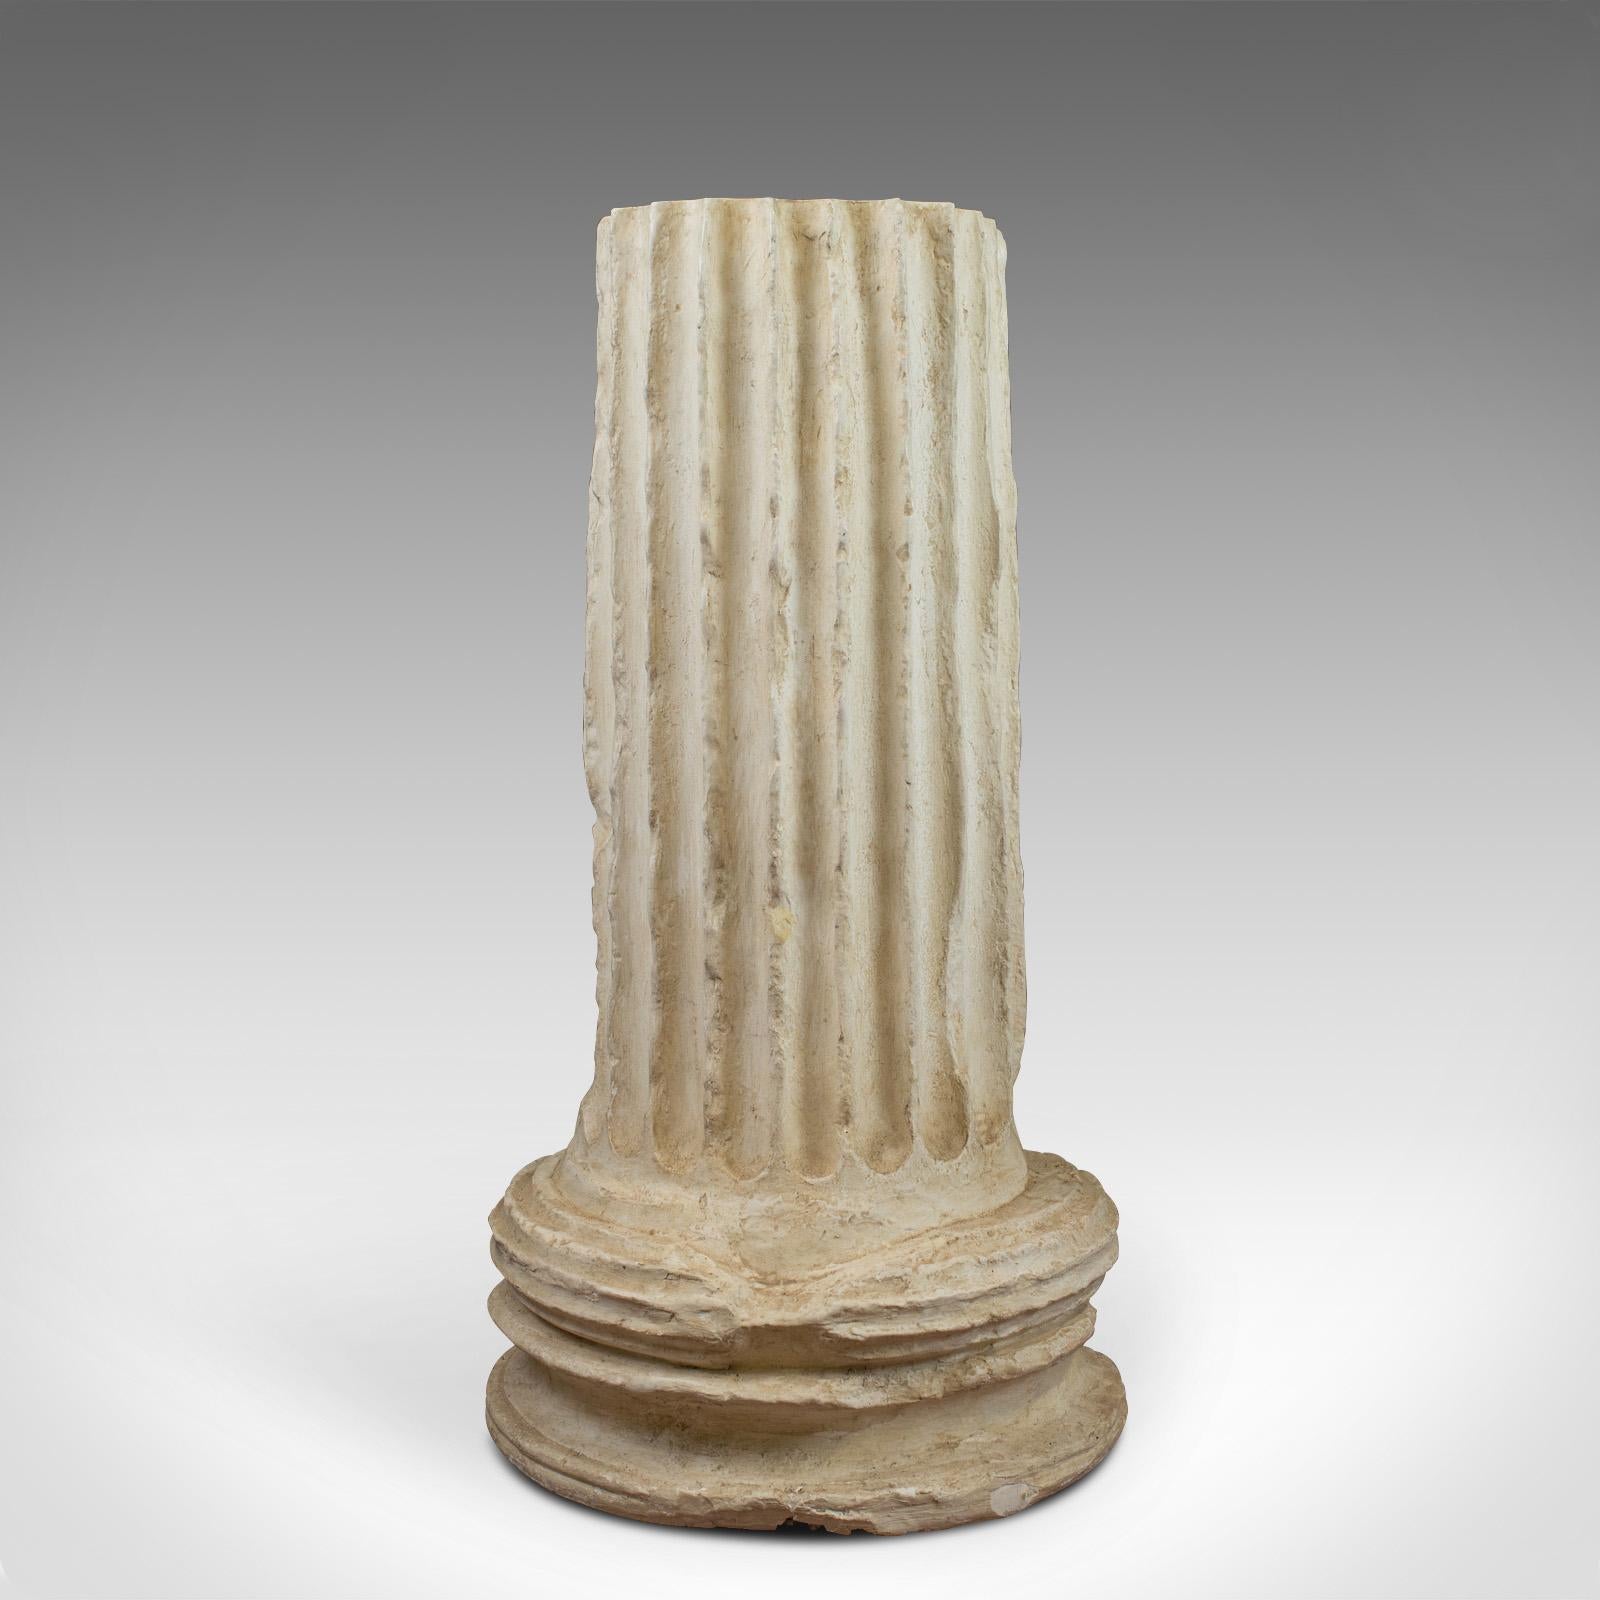 This is an antique fluted column base. A Victorian, architectural plaster pedestal in classical form dating to the turn of the 20th century, circa 1900.

Presented in original condition, pleasingly distressed
Attractive Victorian, classical